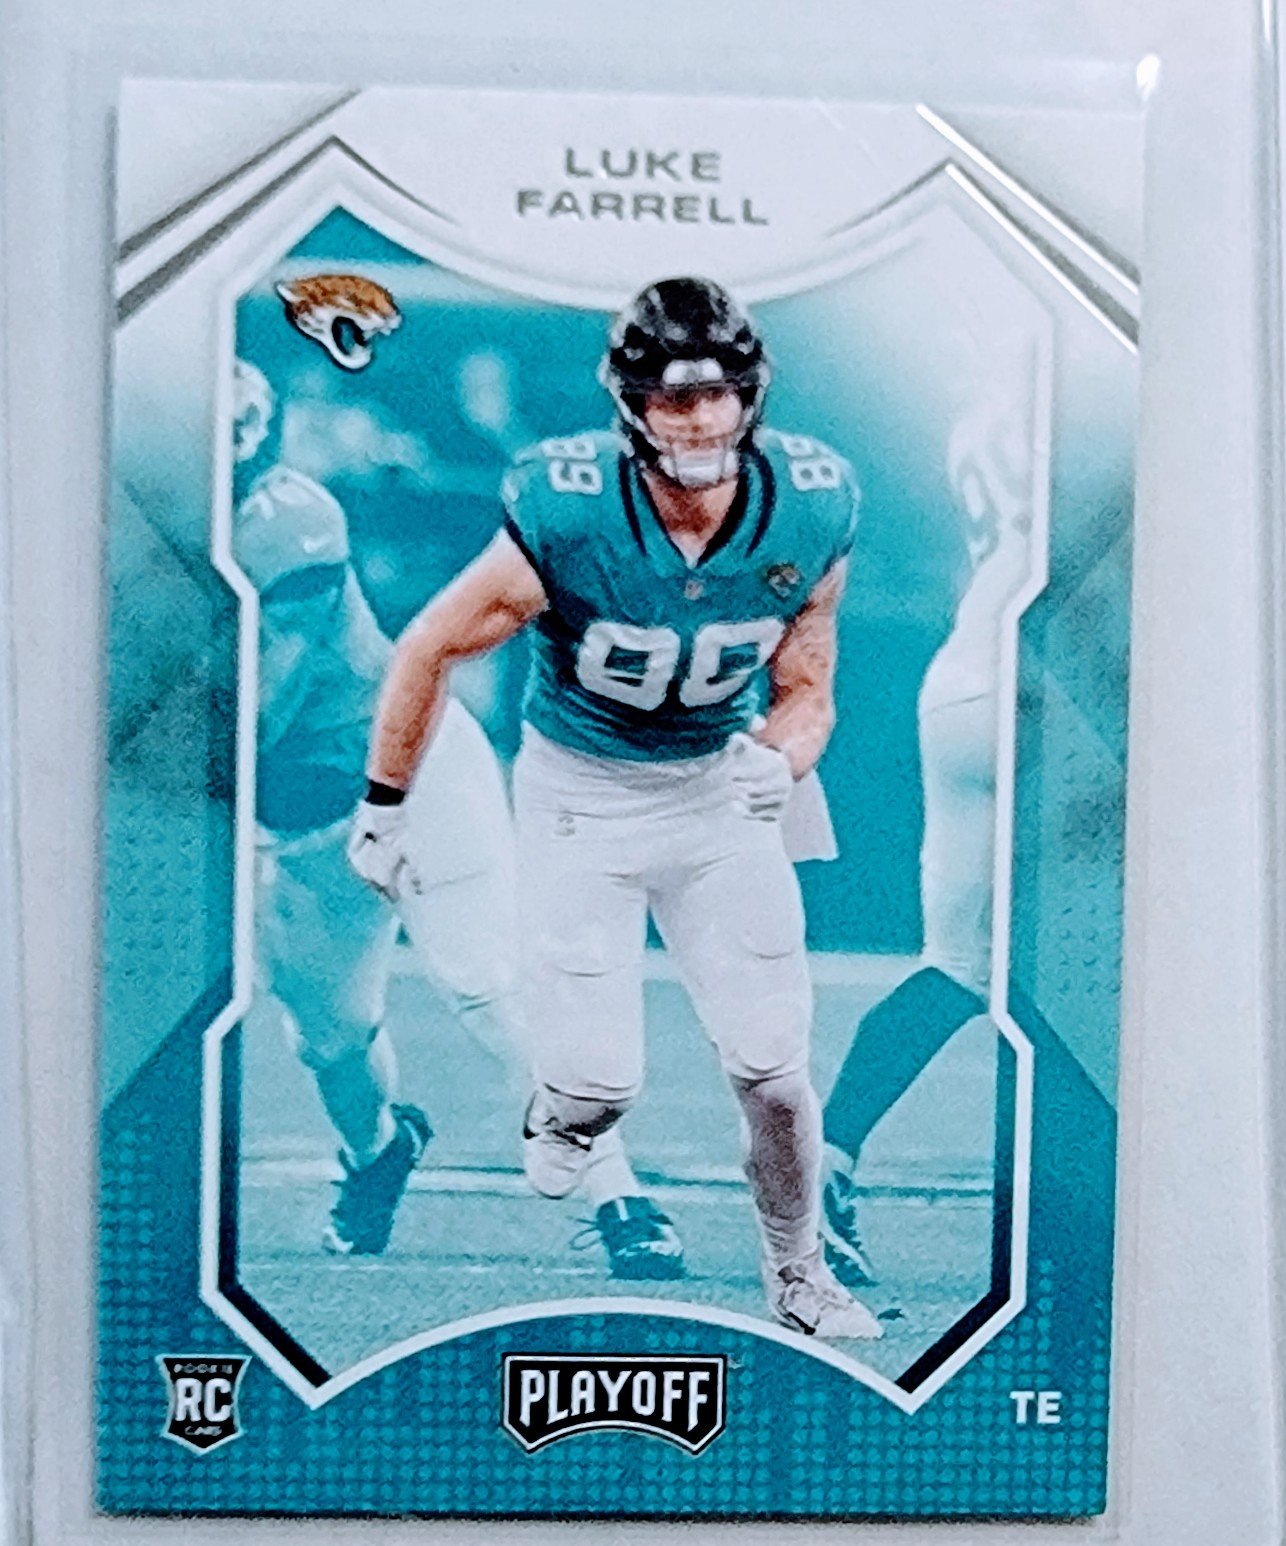 2021 Panini Playoffs Luke Farrel Rookie Football Card AVM1 simple Xclusive Collectibles   